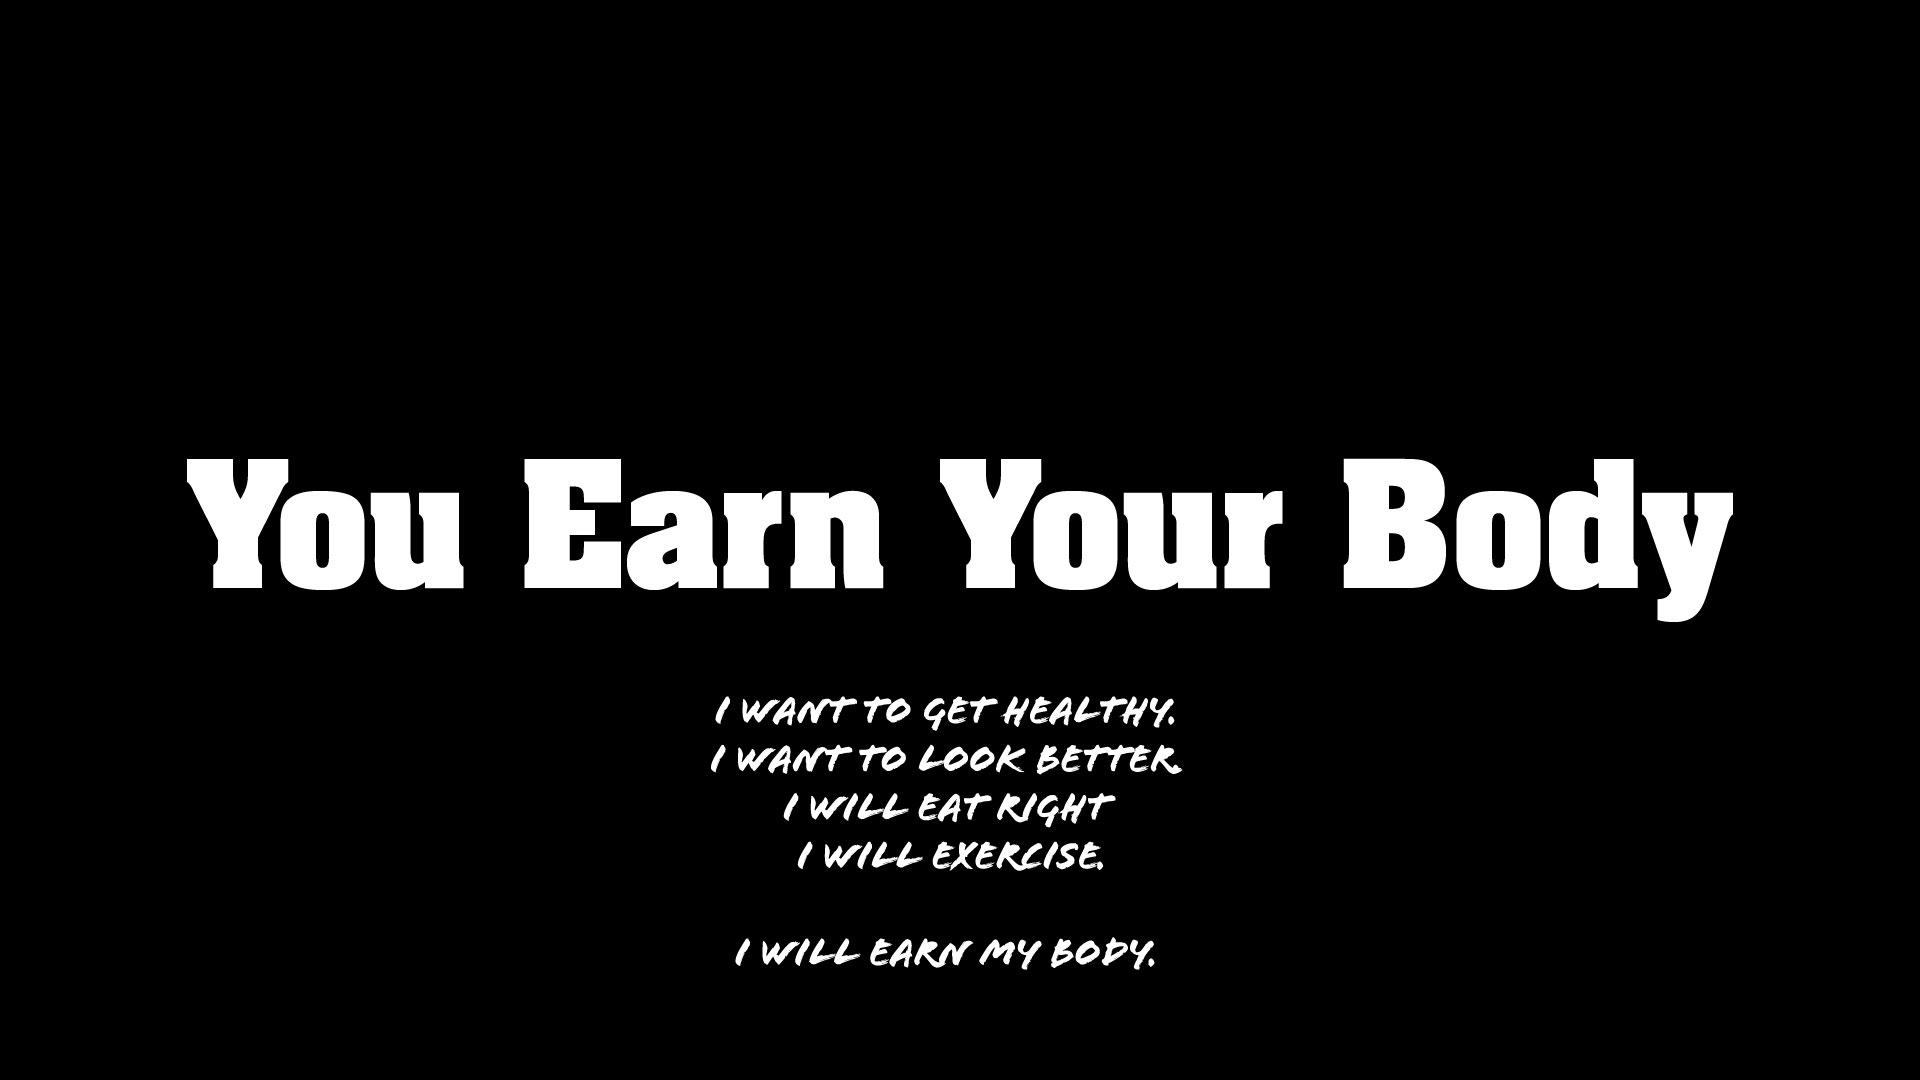 I Will Earn My Body Island Girl Determined 2 Get Fit Get My Sweat On